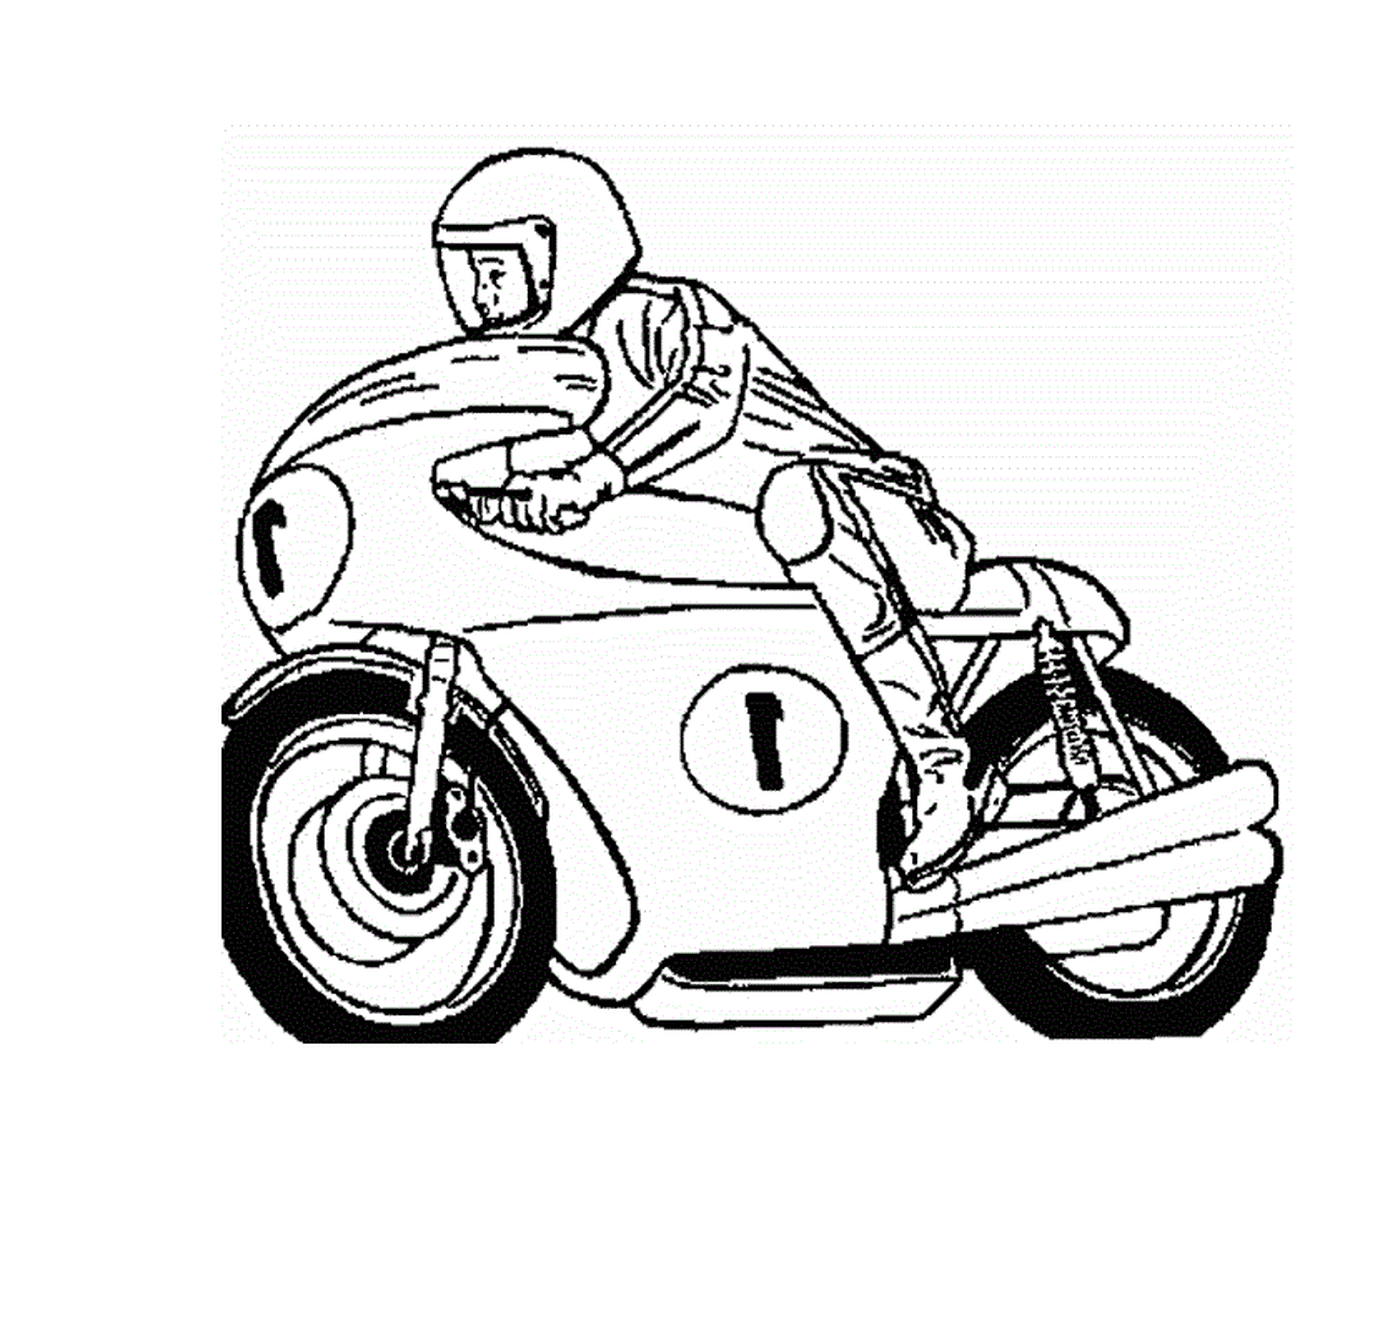  man driving motorbike on the road 